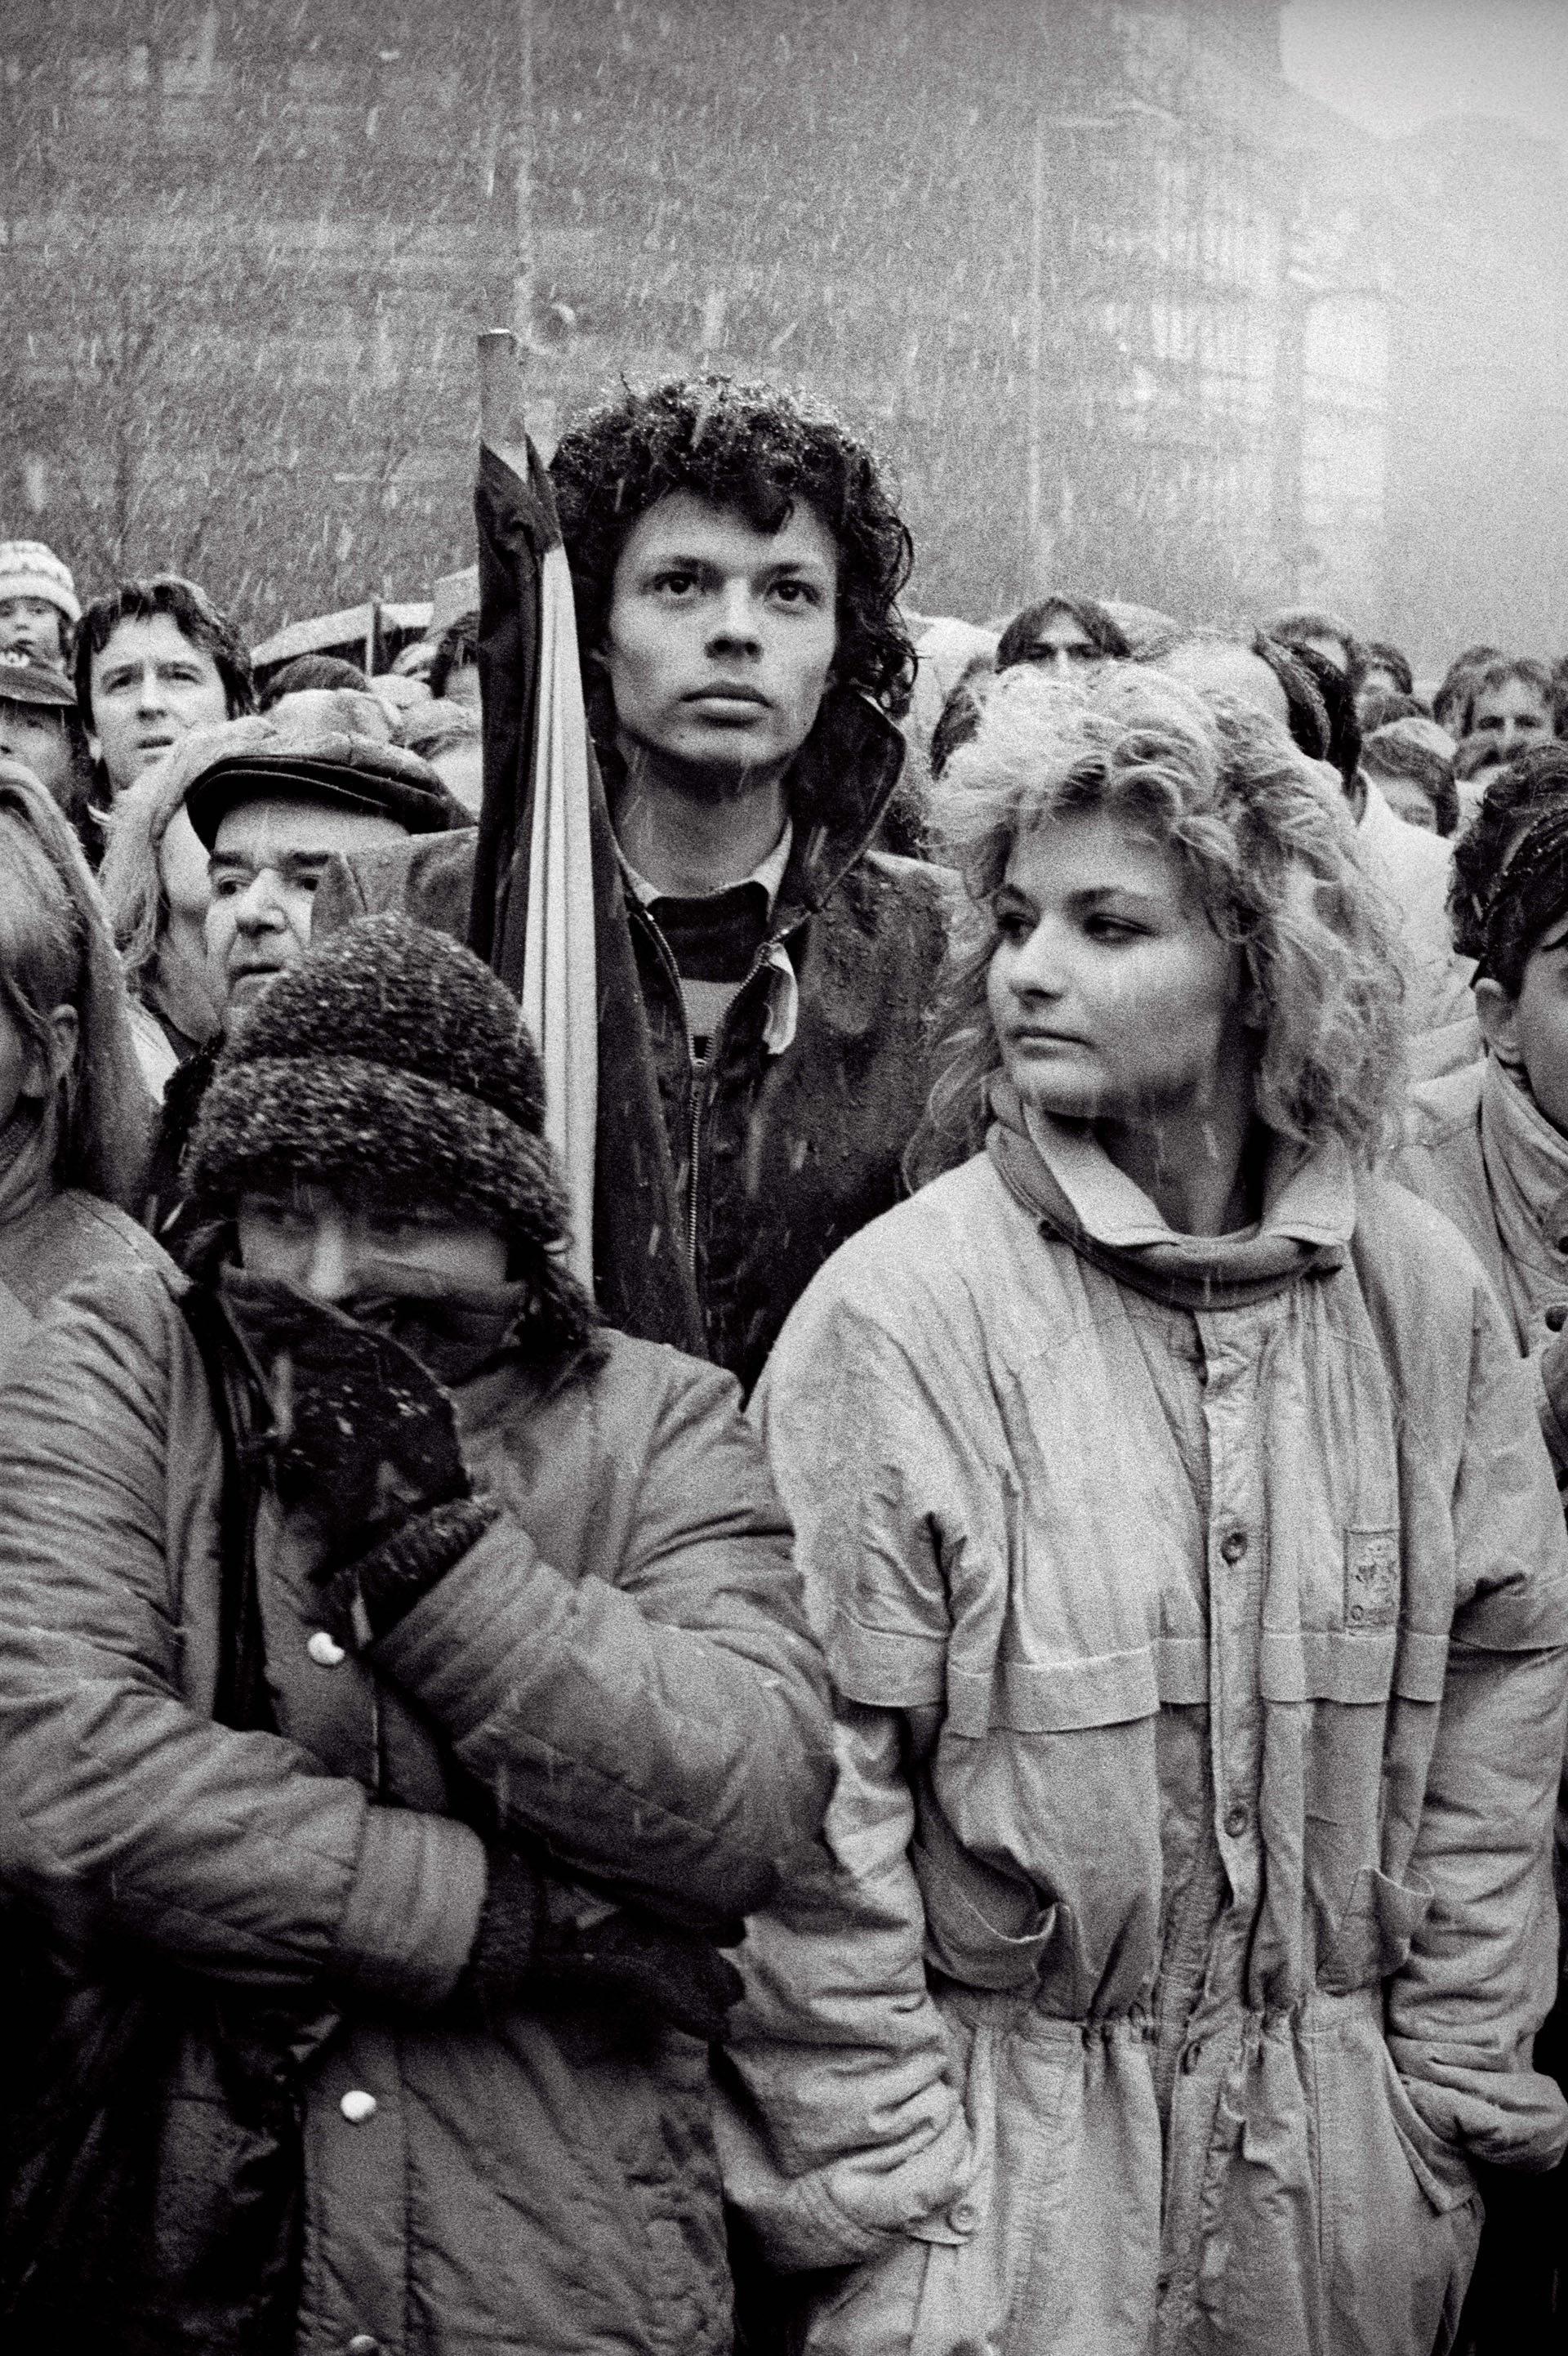 From the outset, students were the driving force behind the Velvet Revolution, immediately calling a strike at all colleges and demanding an investigation into the brutal police attack on student demonstrators at Národní St. Image: Dana Kyndrová